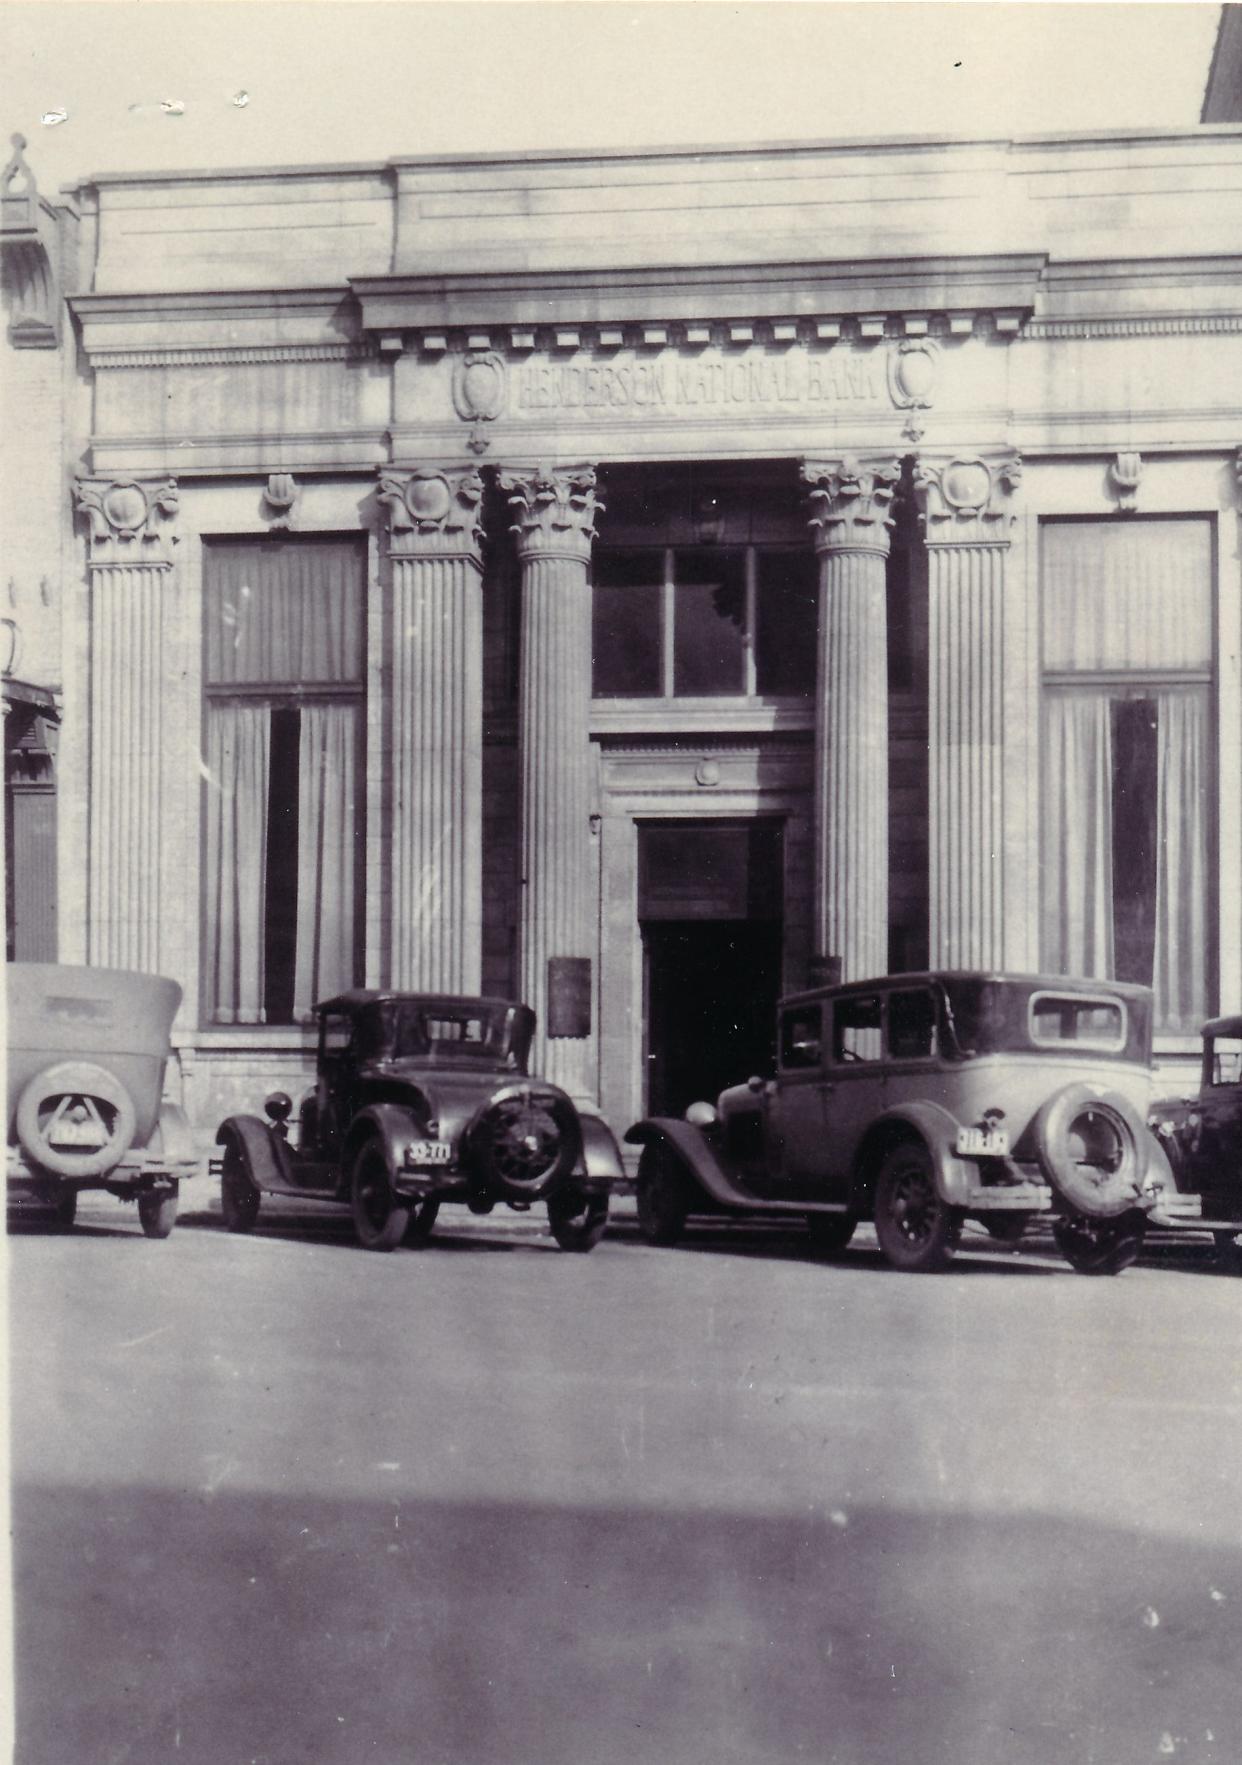 What originally was Henderson National Bank when it opened in late 1923 became First National Bank a decade later because of a reorganization. The building currently houses The Vault event venue.